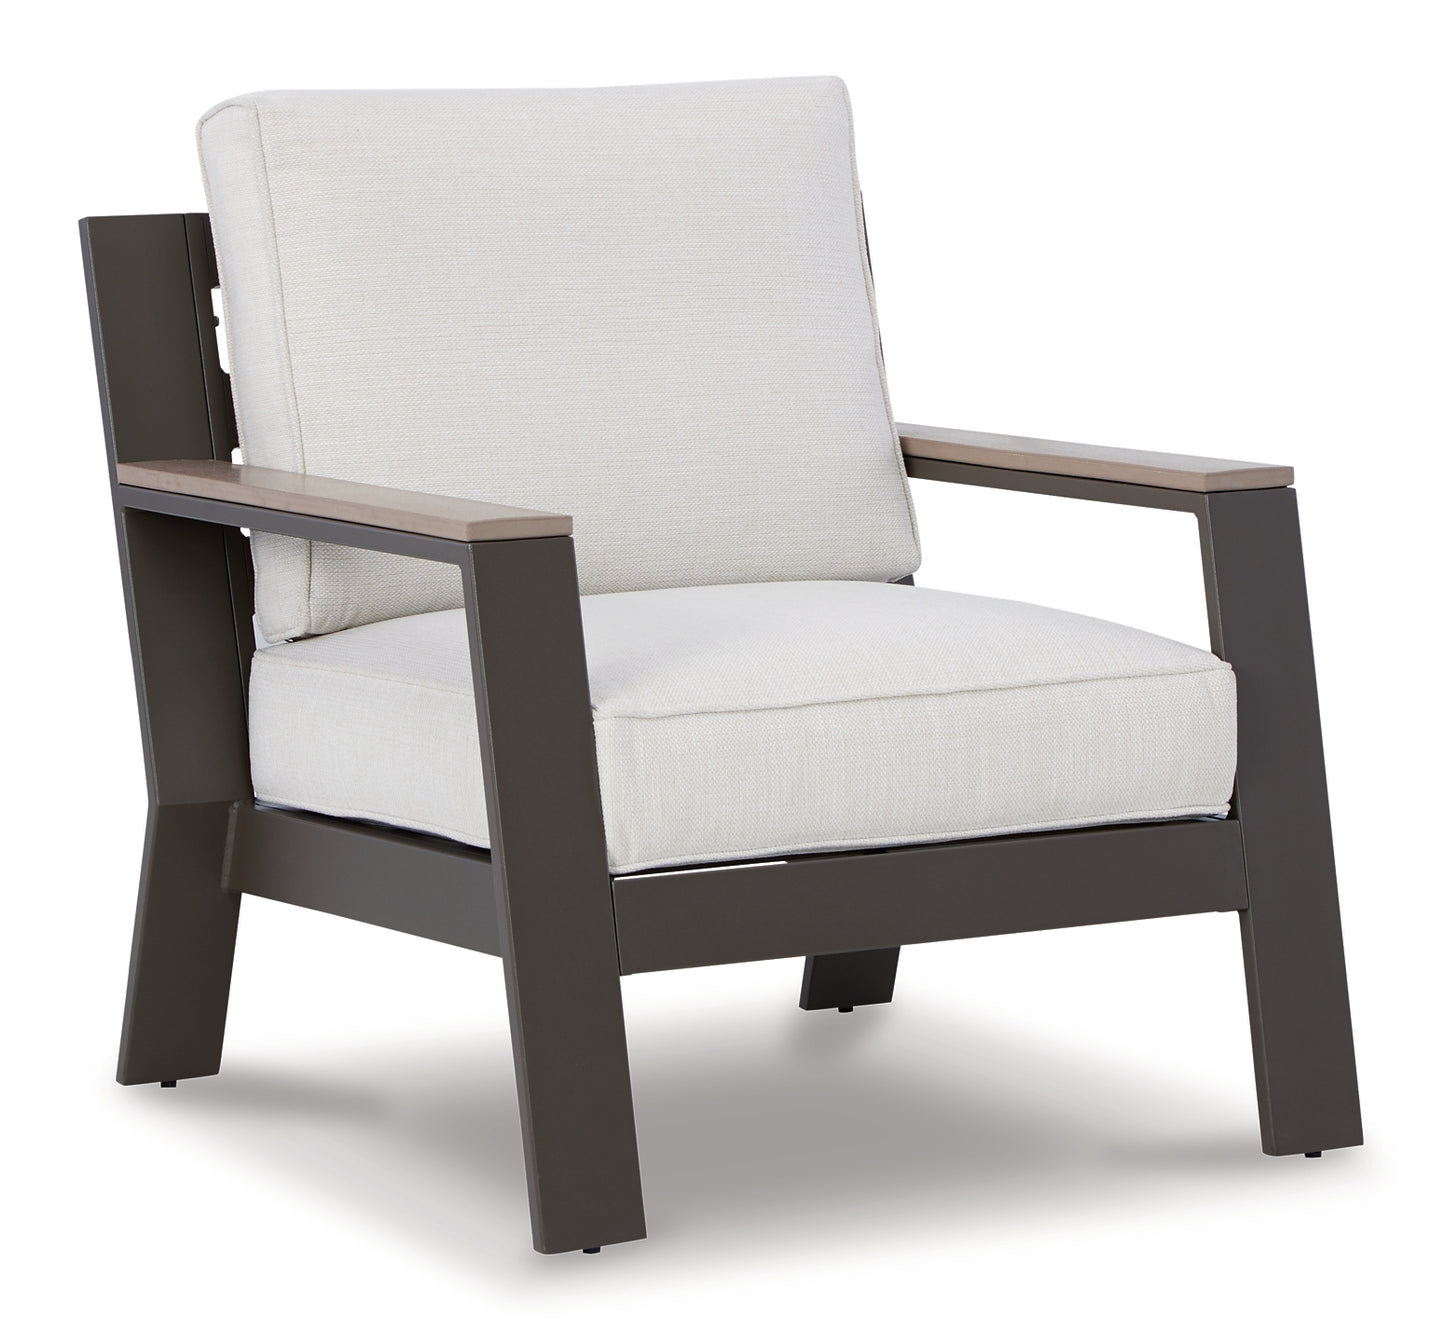 Ashley Express - Tropicava Outdoor Loveseat and Lounge Chair with Coffee Table and 2 End Tables